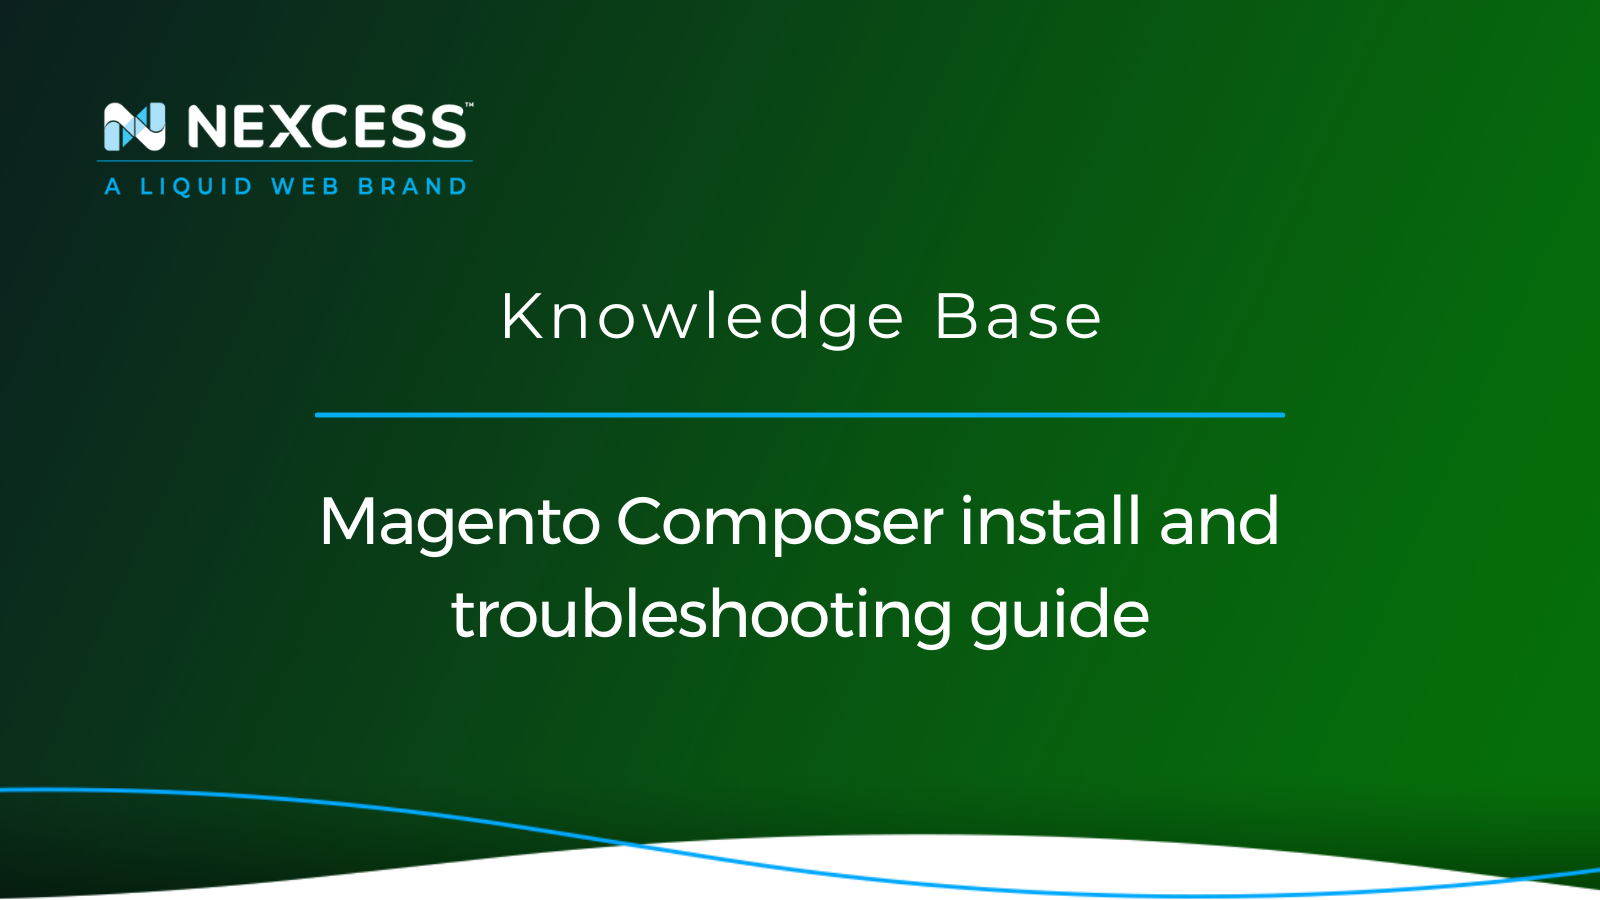 Magento Composer install and troubleshooting guide